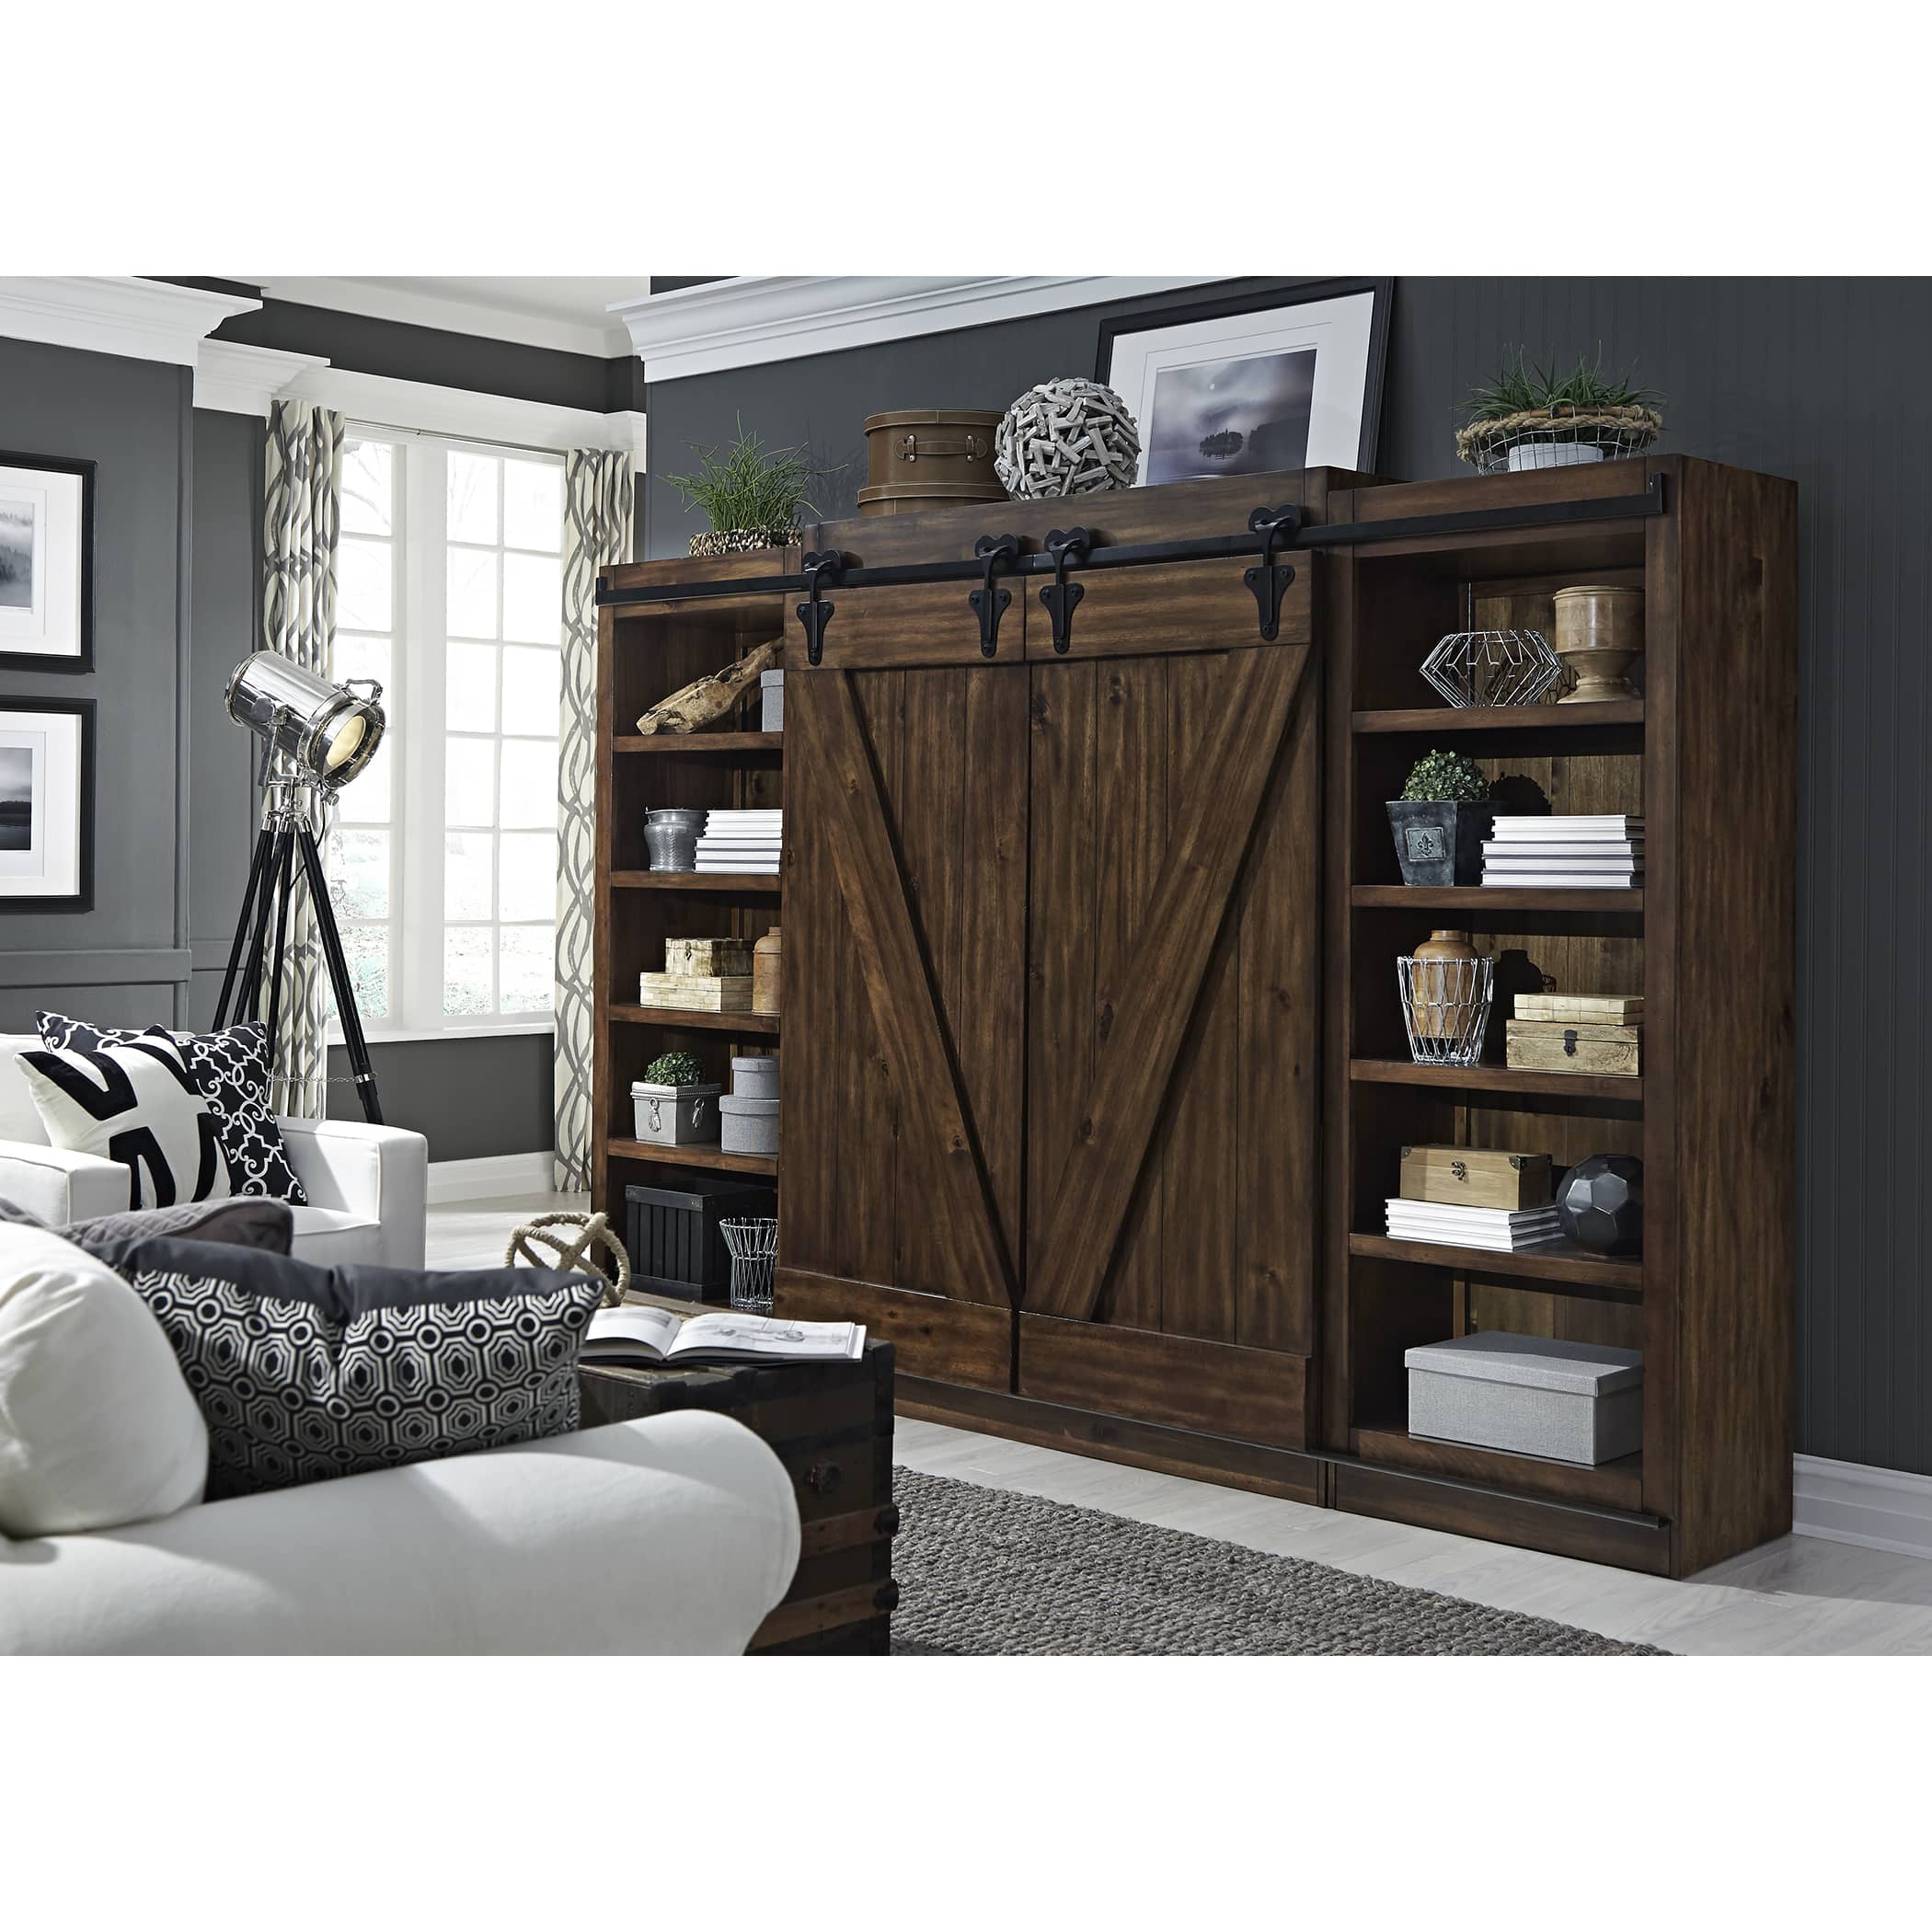 Buy TV Stands & Entertainment Centers Online at Overstock | Our Best Living Room Furniture Deals